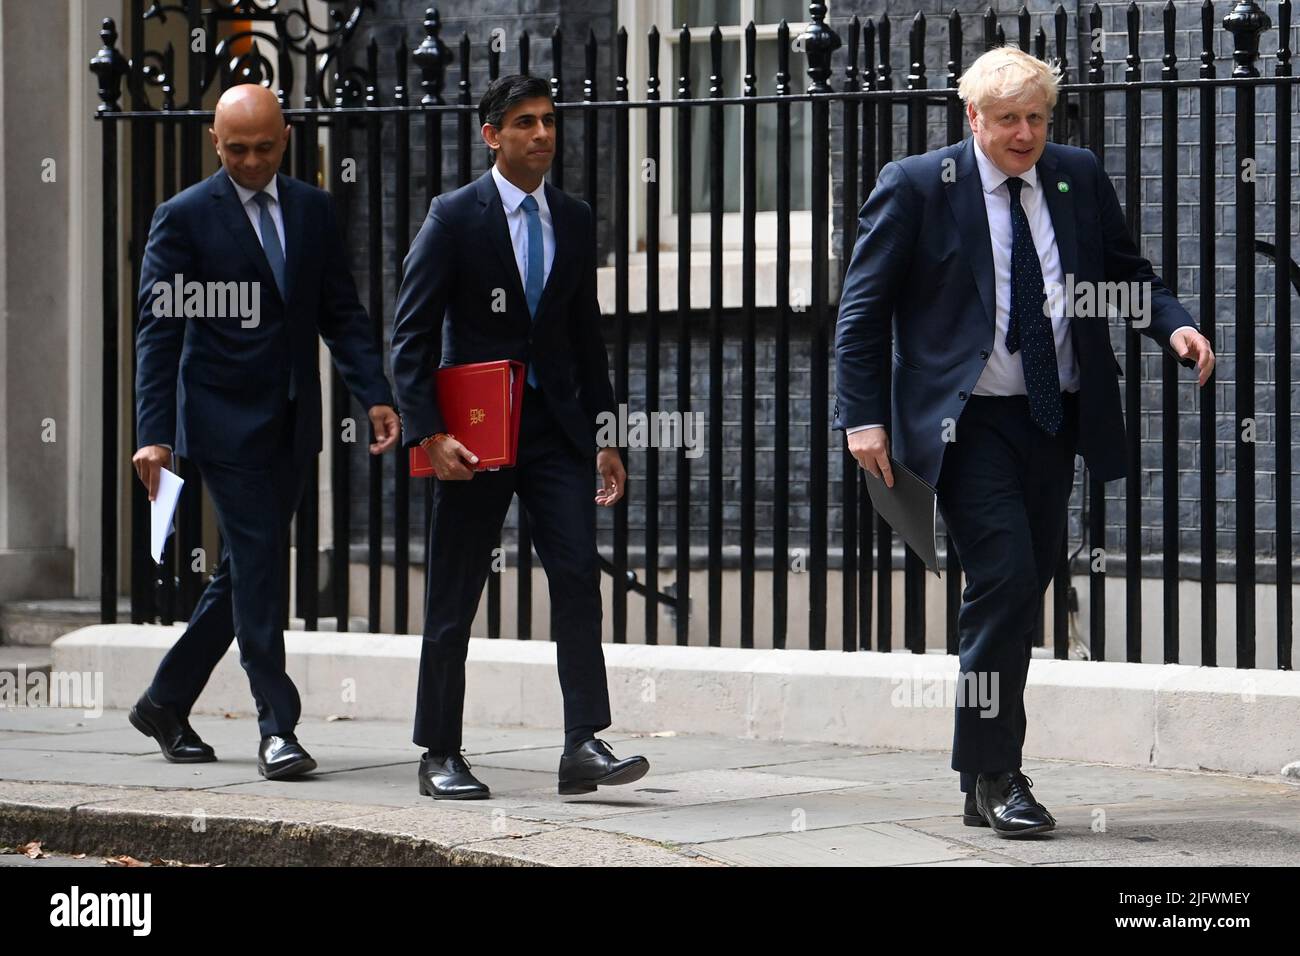 File photo dated 07/09/21 of (left to right) Health Secretary Sajid Javid, Chancellor of the Exchequer Rishi Sunak and Prime Minister Boris Johnson arriving at No 9 Downing Street for a media briefing. Chancellor of the Exchequer Rishi Sunak and Health Secretary Sajid Javid, have resigned after the Prime Minister was forced into a humiliating apology over his handling of the Chris Pincher row after it emerged he had forgotten about being told of previous allegations of 'inappropriate' conduct. Issue date: Tuesday July 5, 2022. Stock Photo